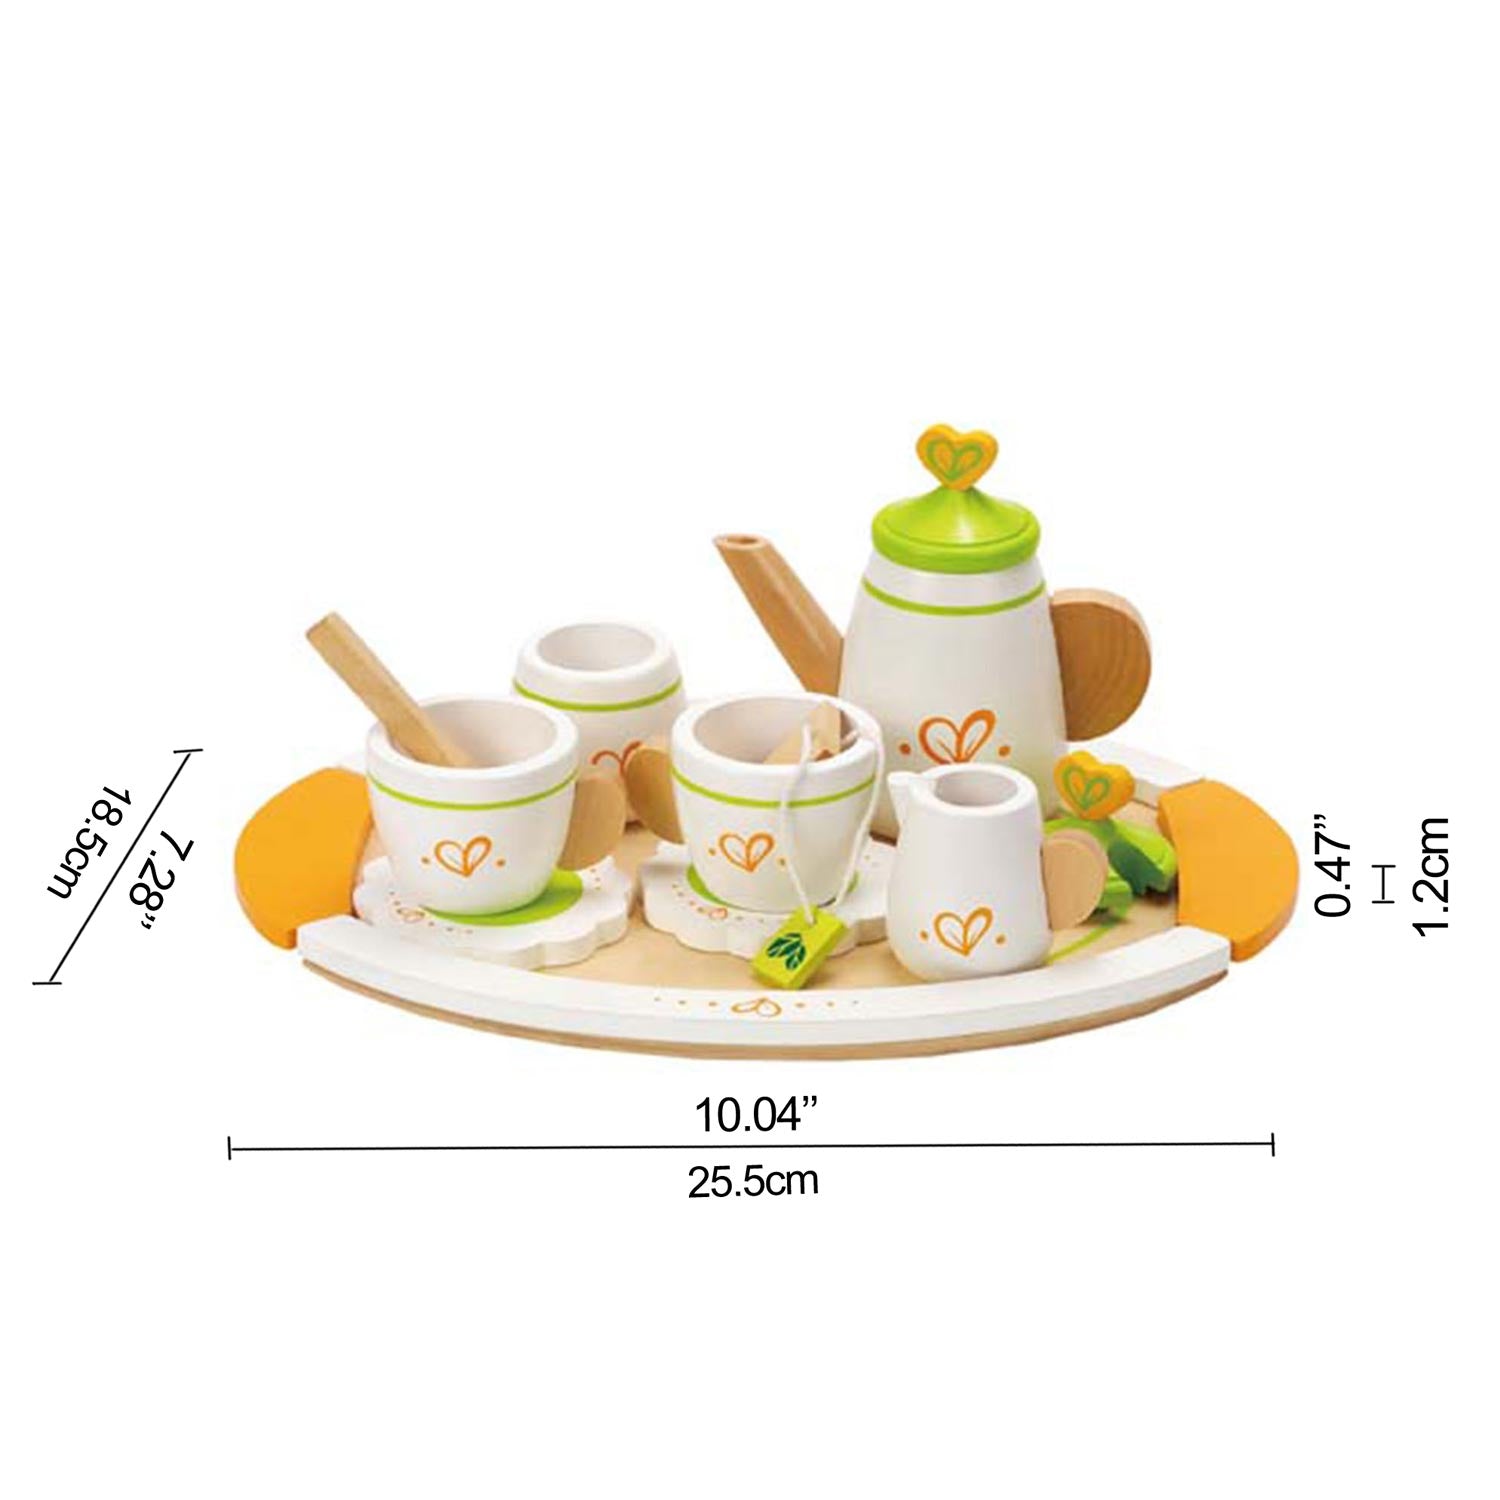 Hape Tea set for Two imaginative play quality wooden toys The Toy Wagon